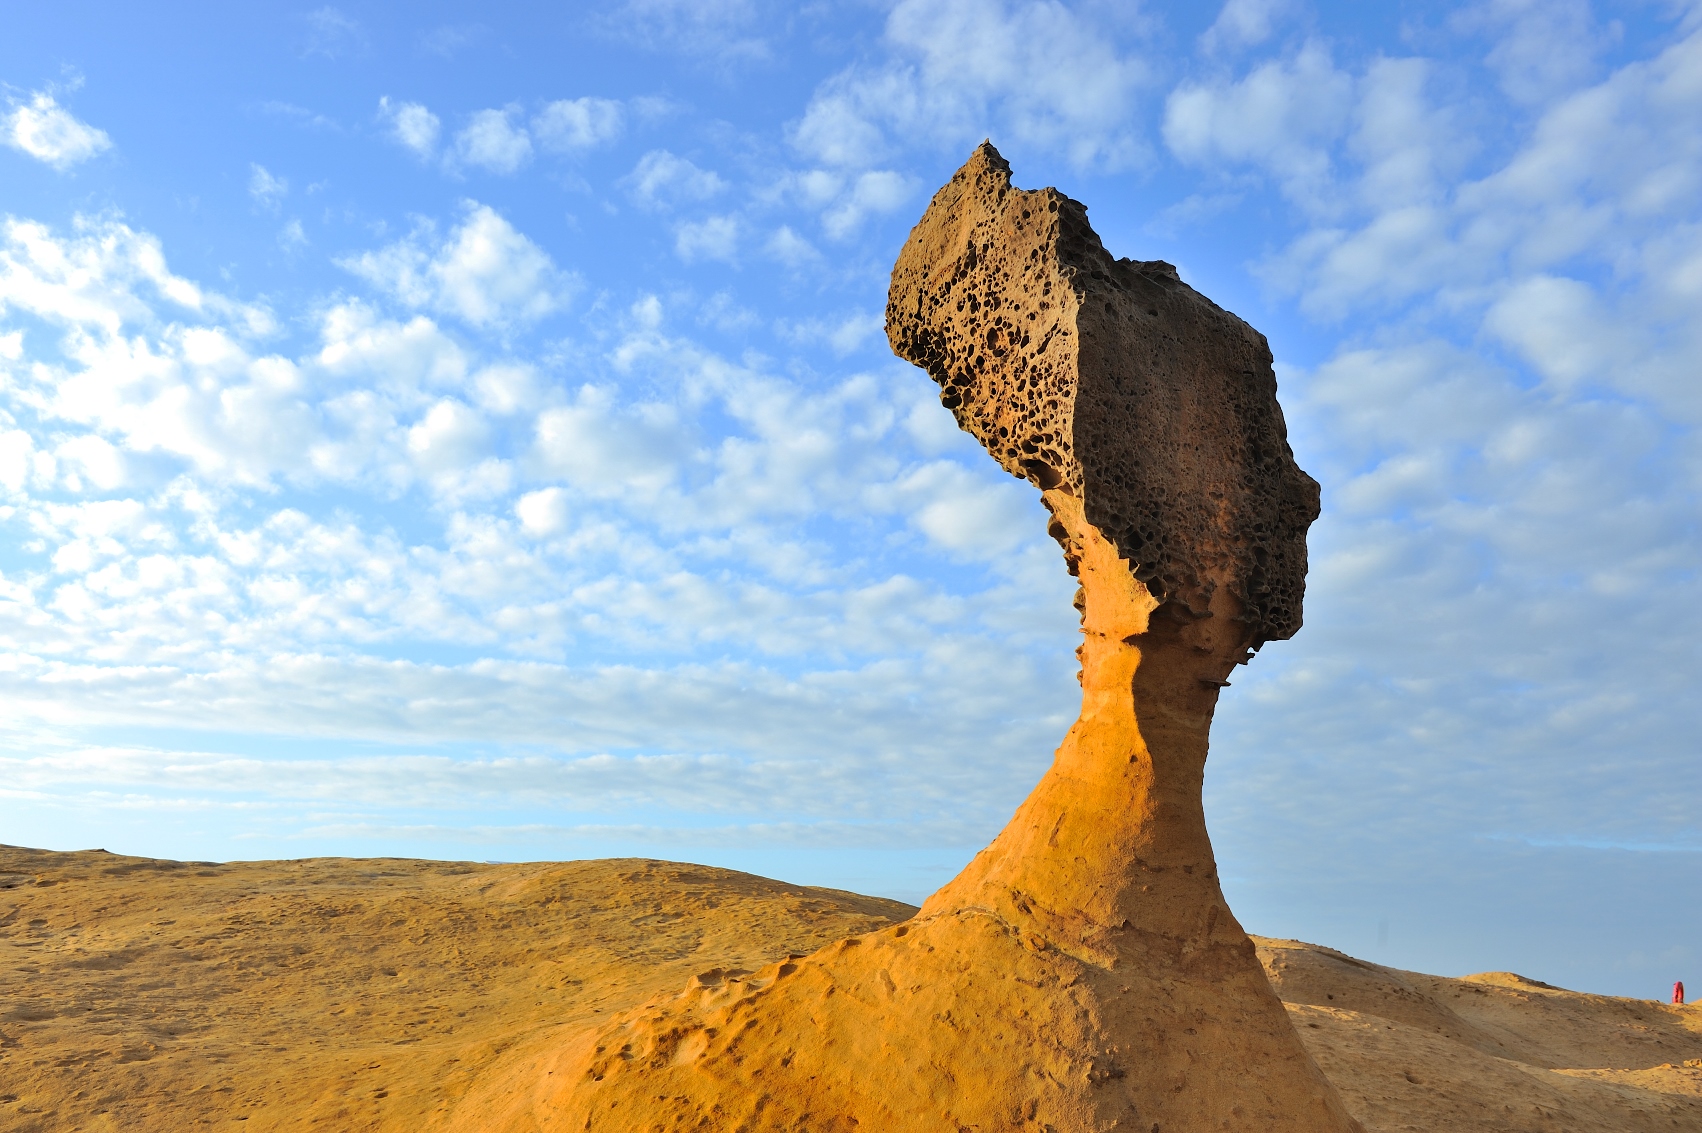 “Queen’s Head” in the Yehliu Geopark